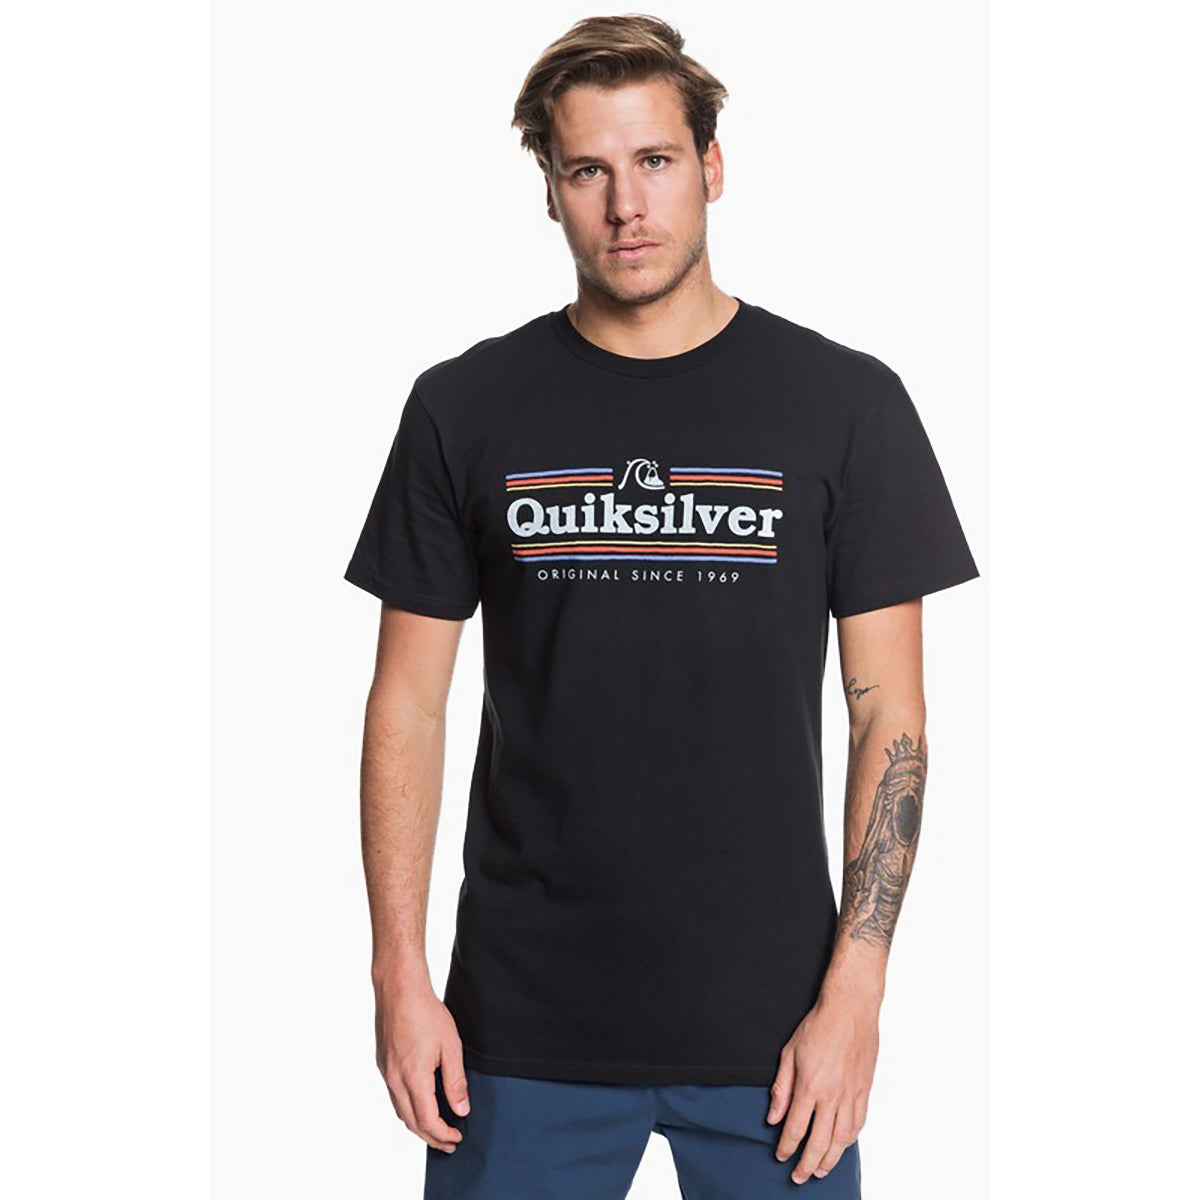 Quiksilver Get Buzzy Mens Short-Sleeve Shirts - Black / Small